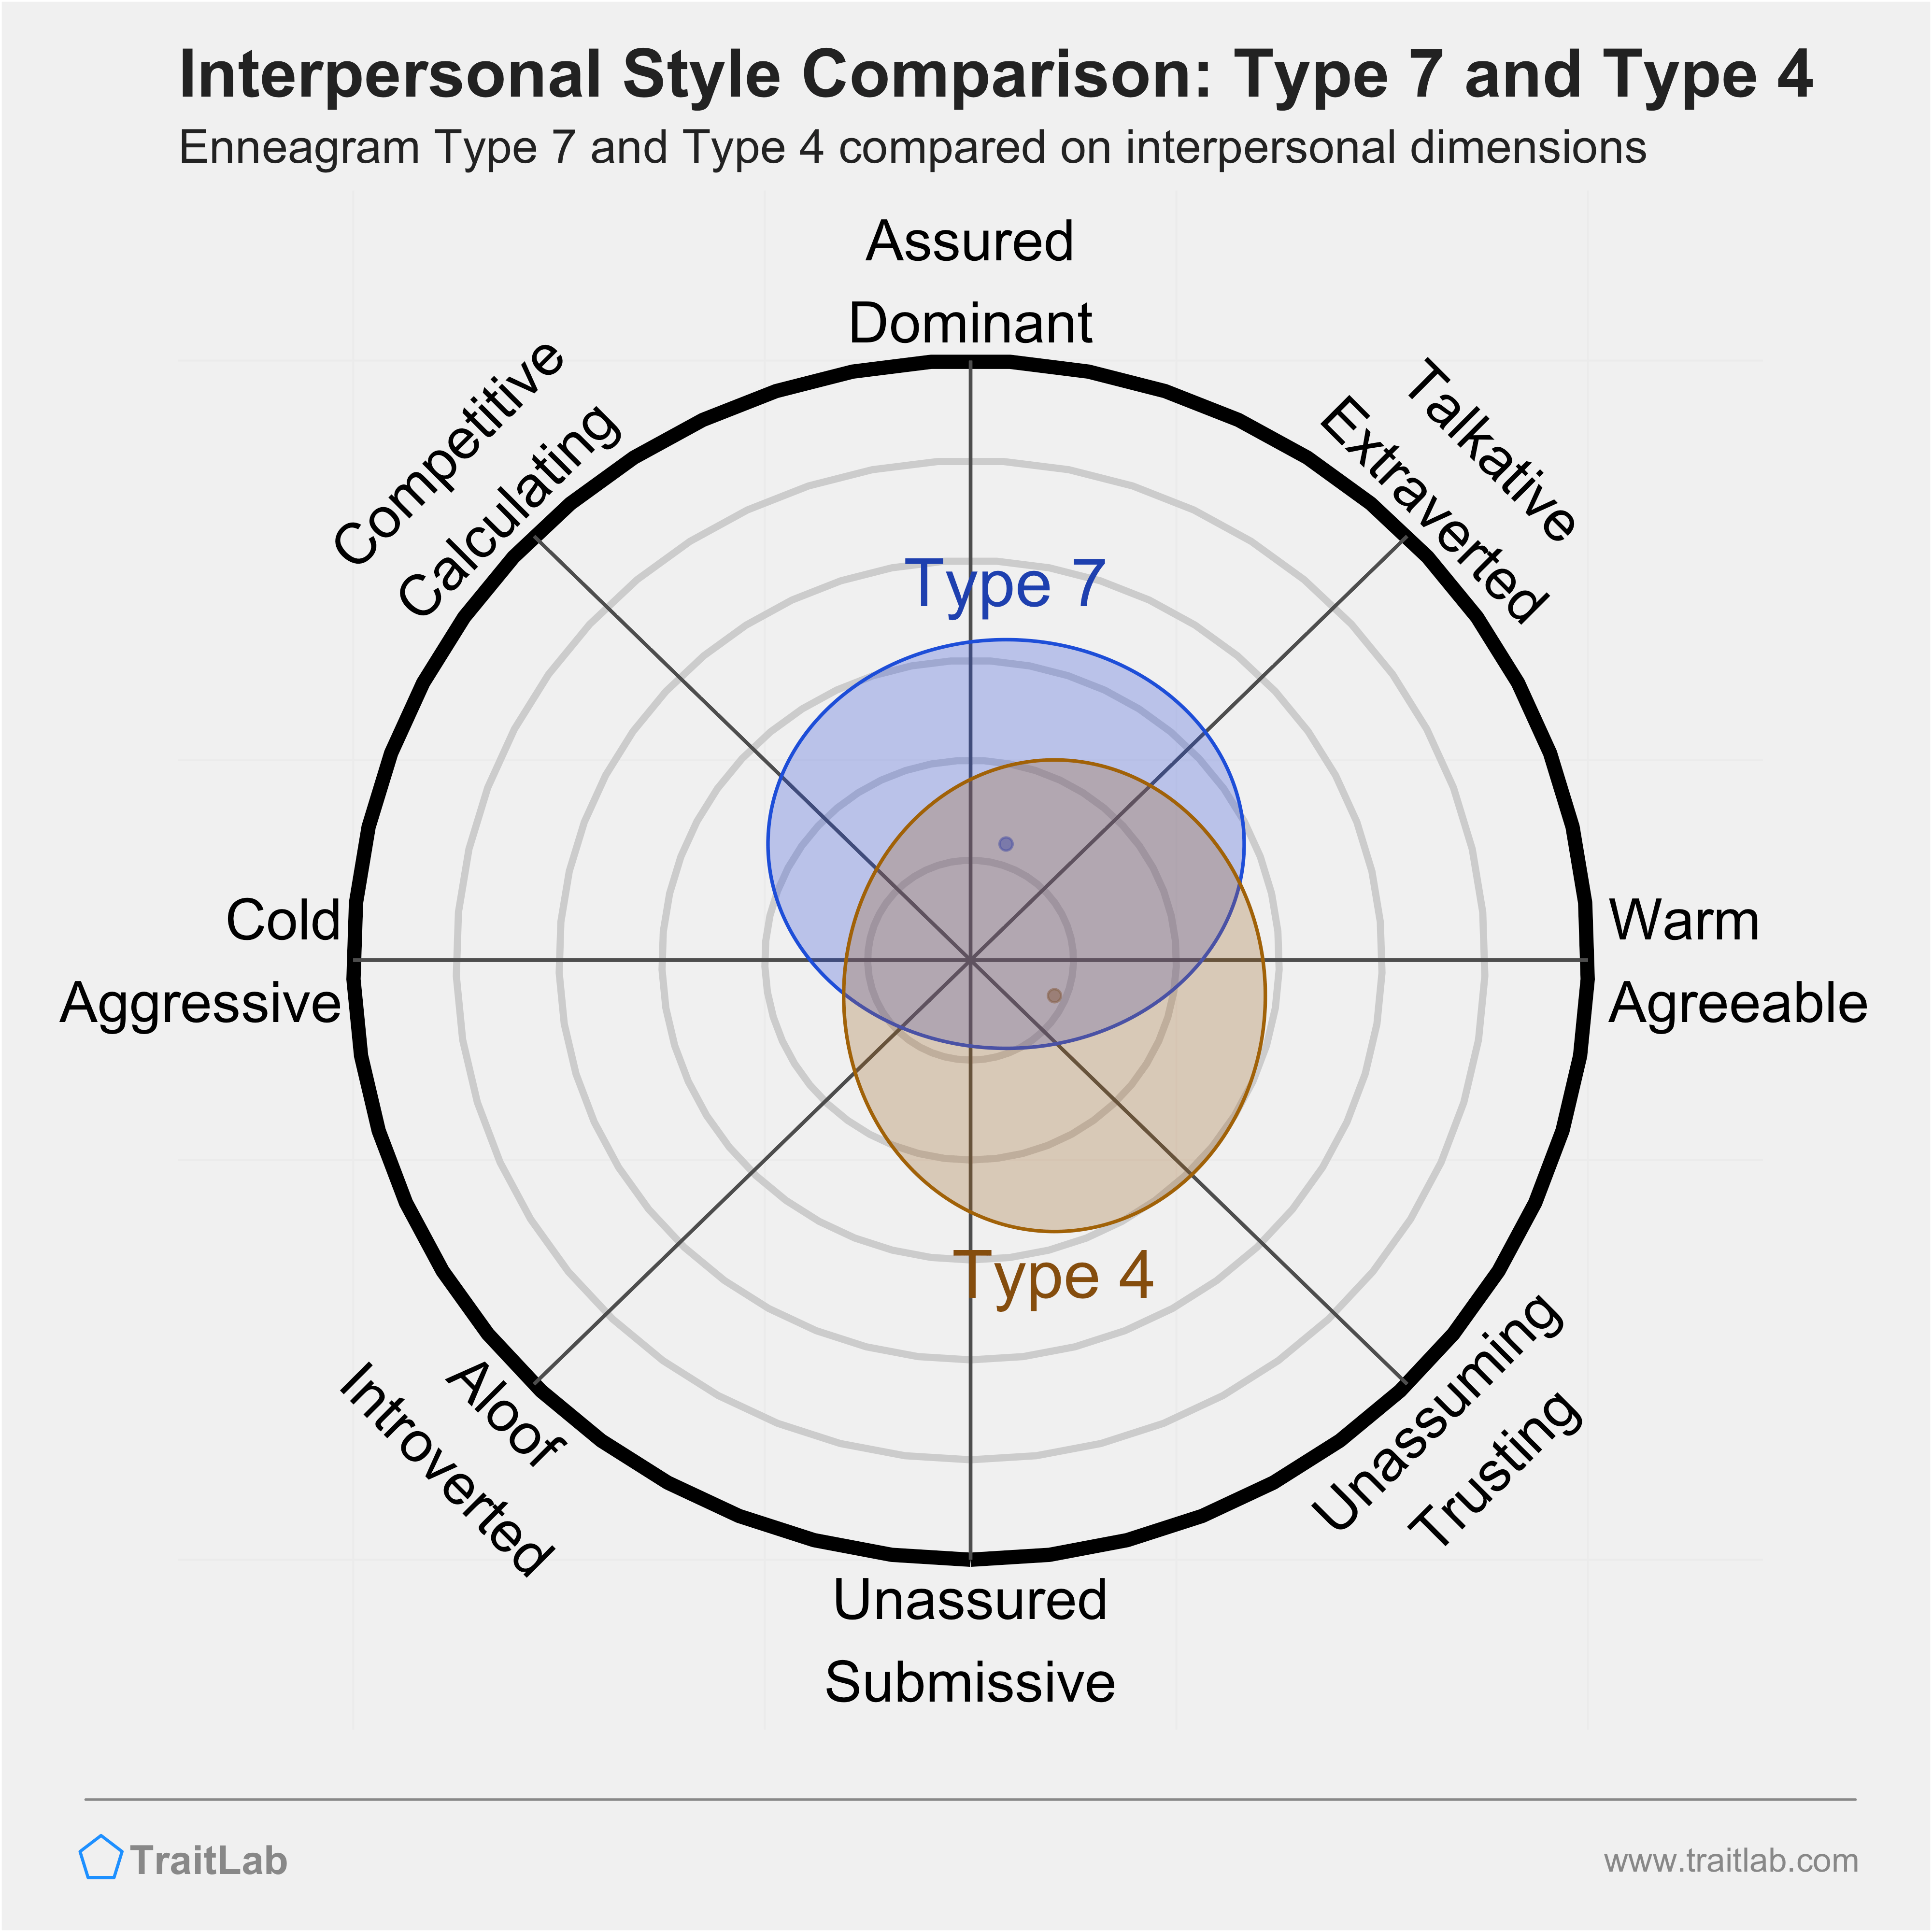 Enneagram Type 7 and Type 4 comparison across interpersonal dimensions